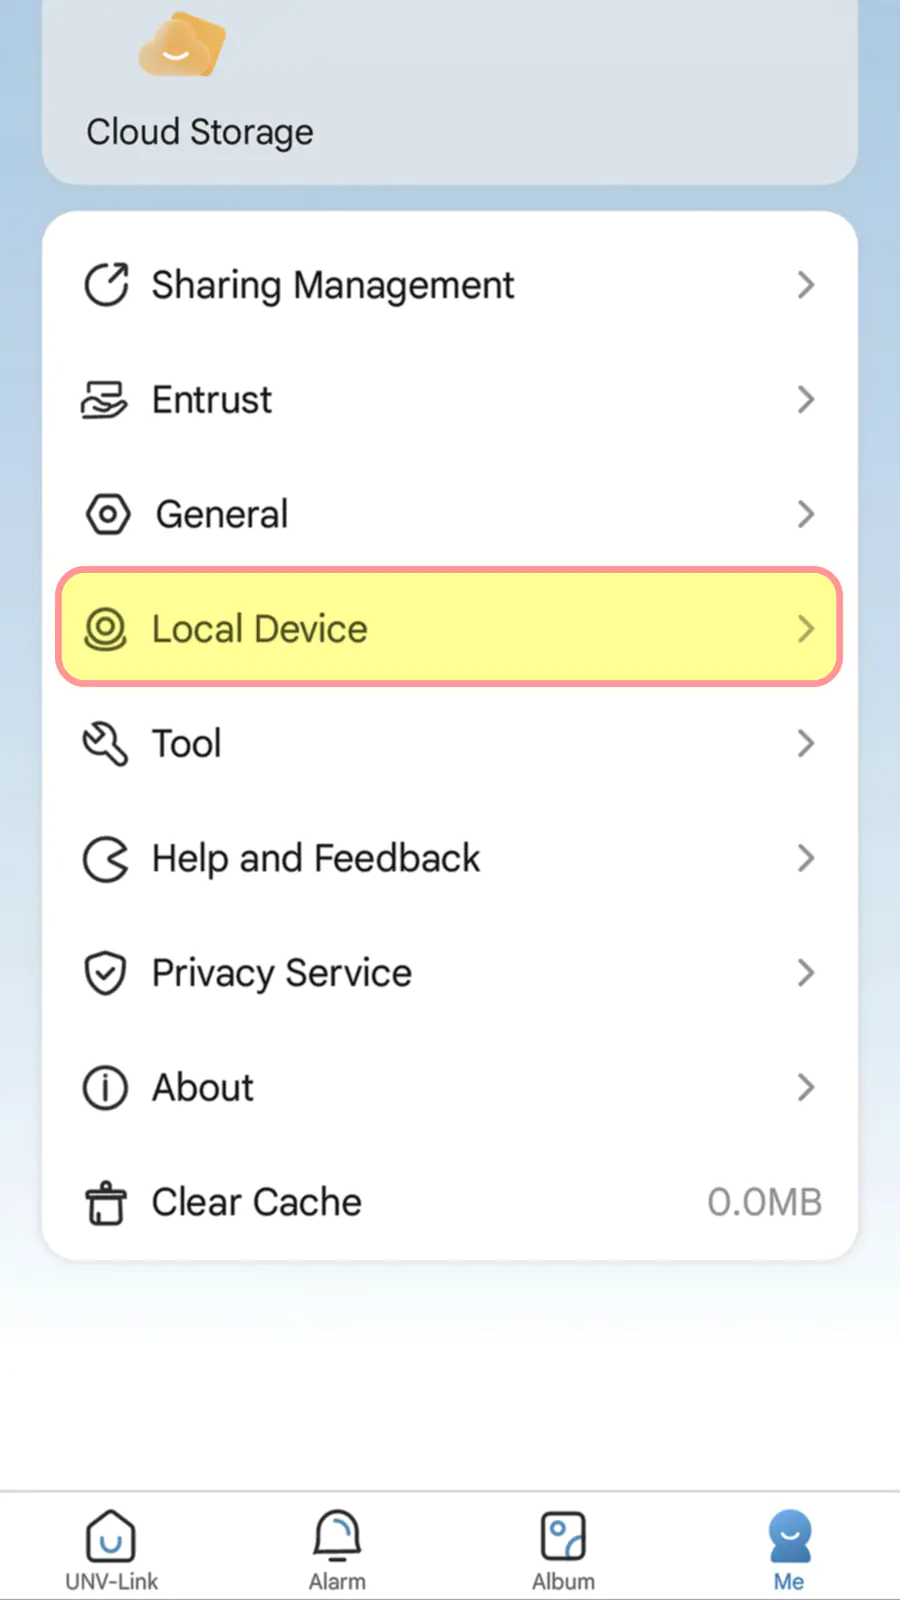 The UNV-Link menu with a couple options, including Local Device which is highlighted in yellow